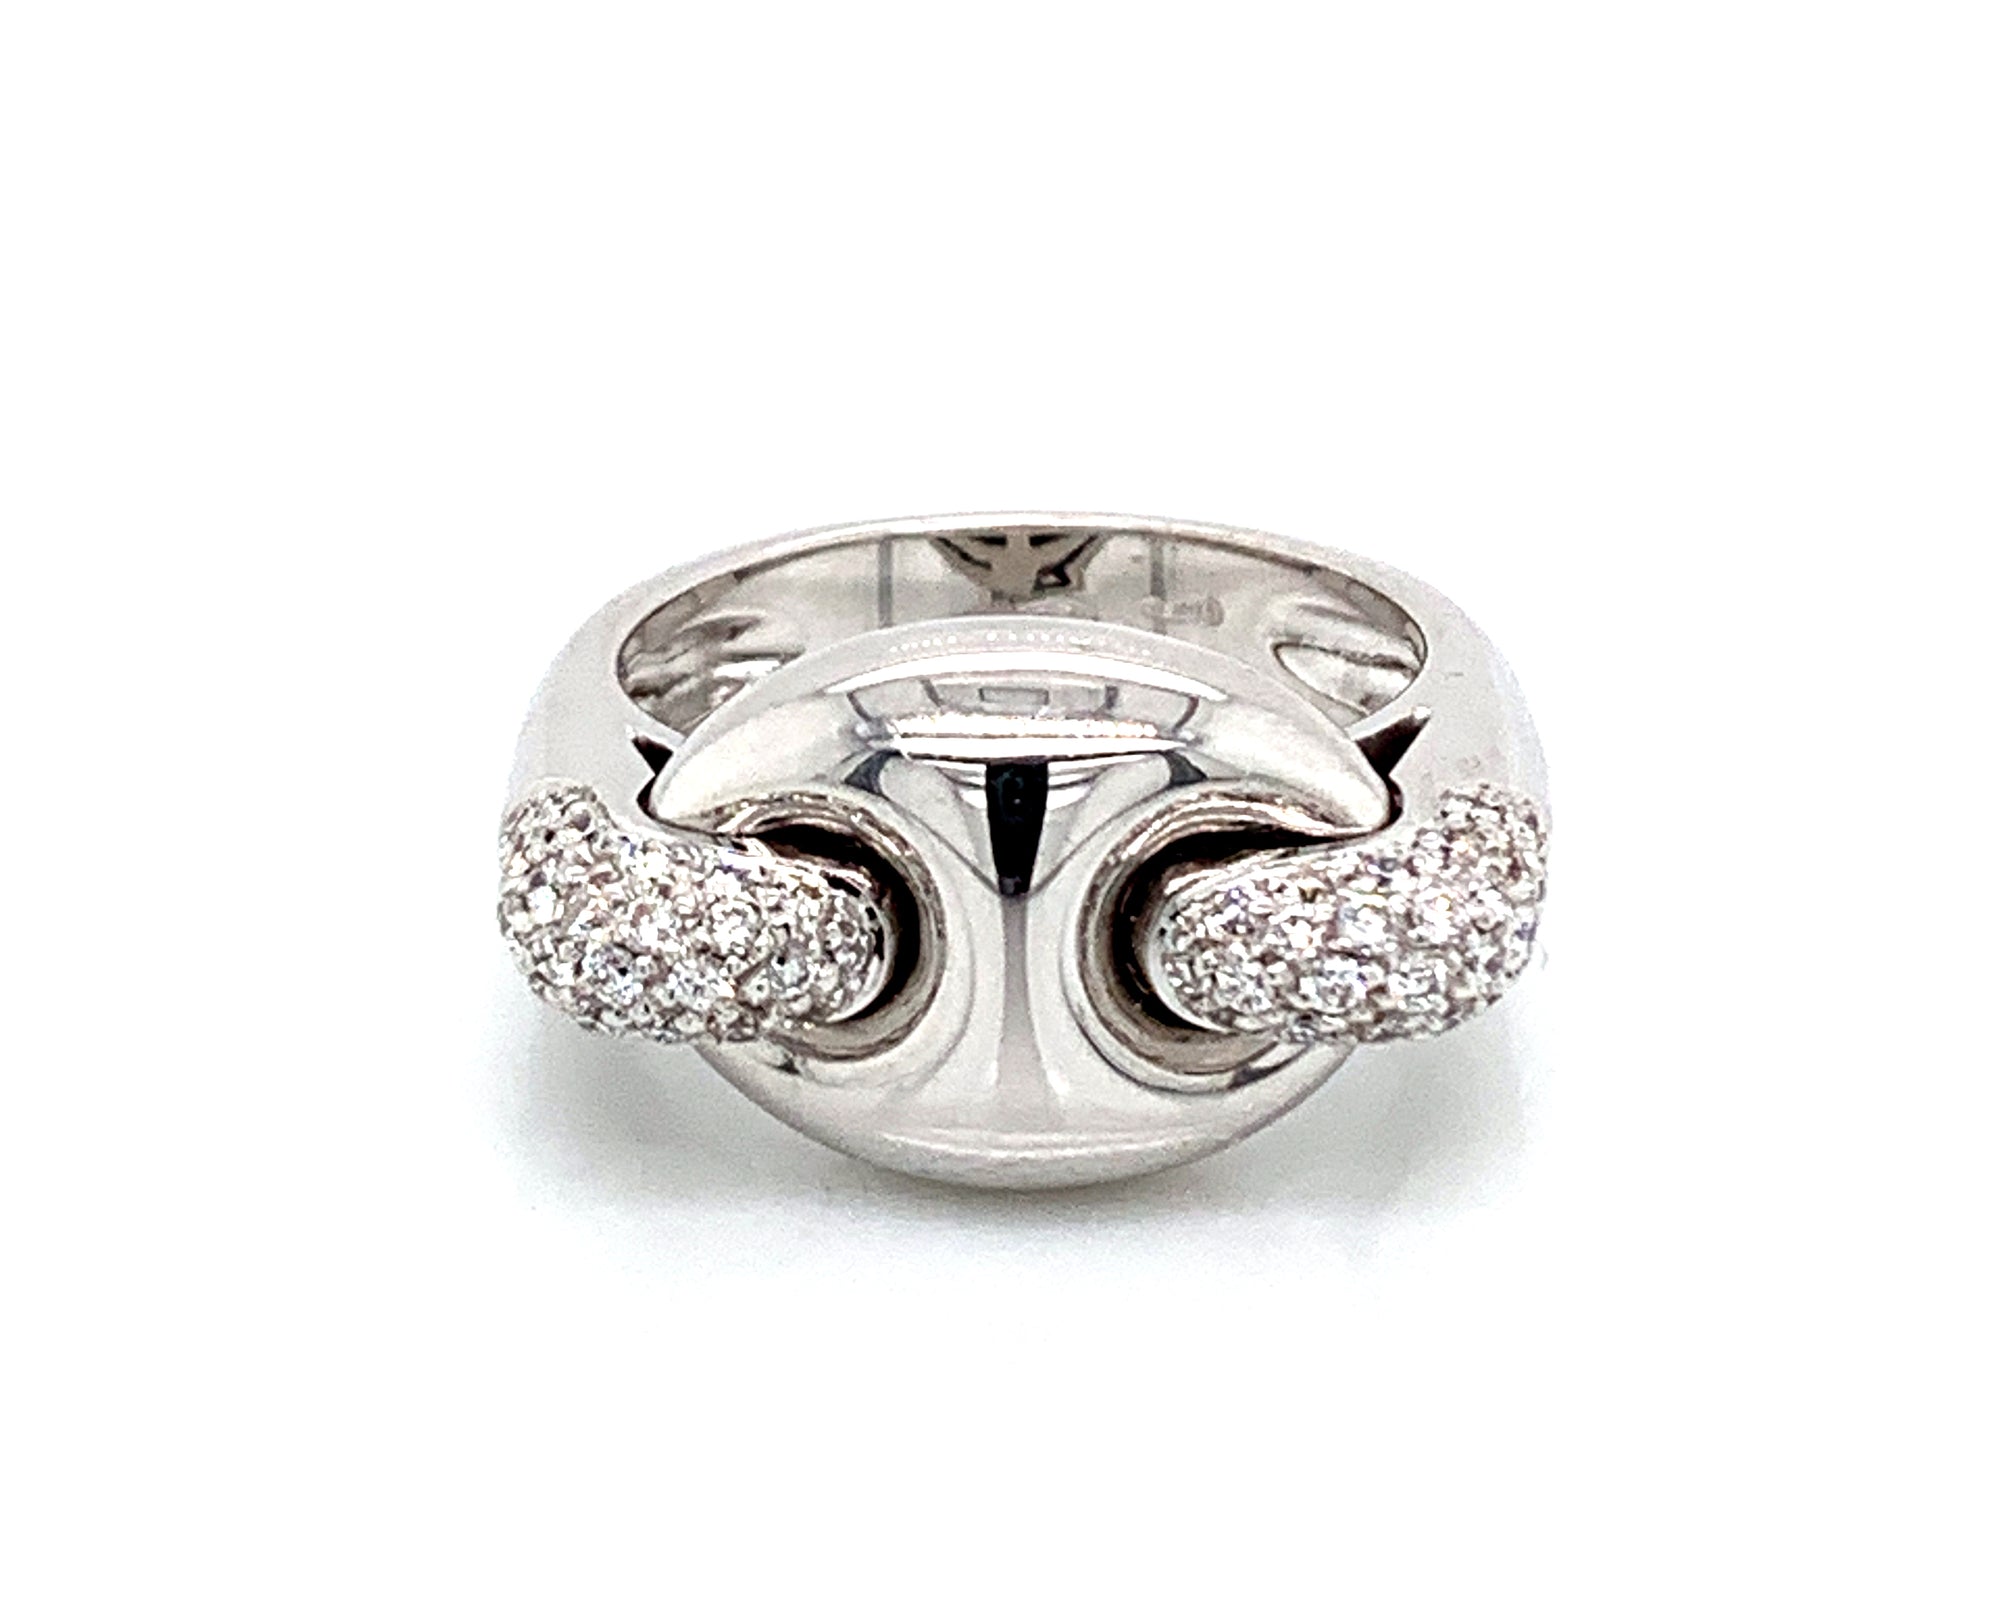 18K White Gold Gucci Link Ring